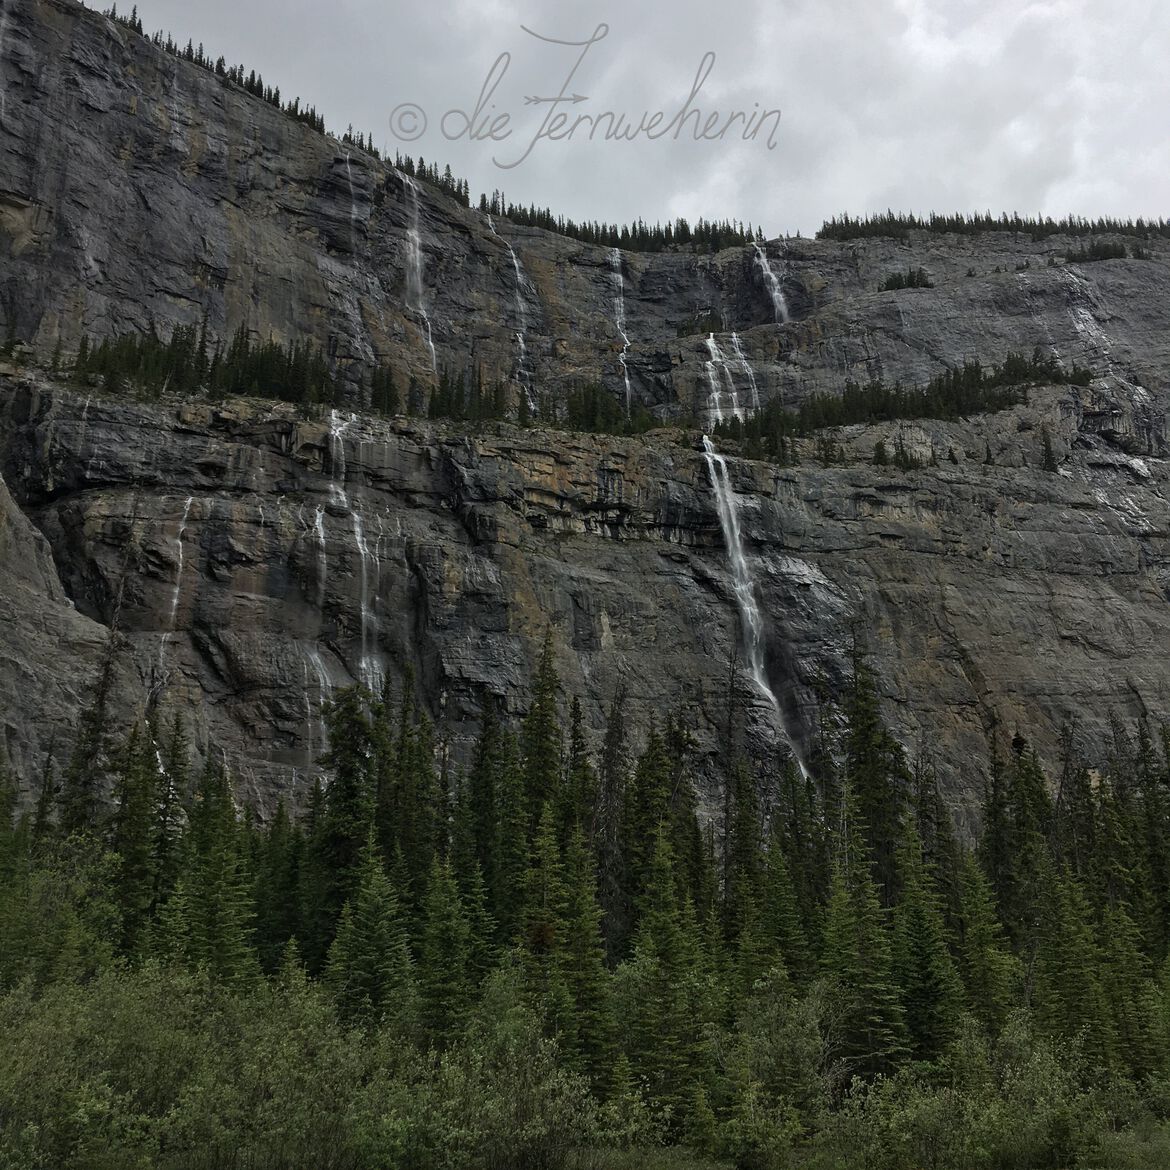 The Weeping Wall Viewpoint on the Icefields Parkway.